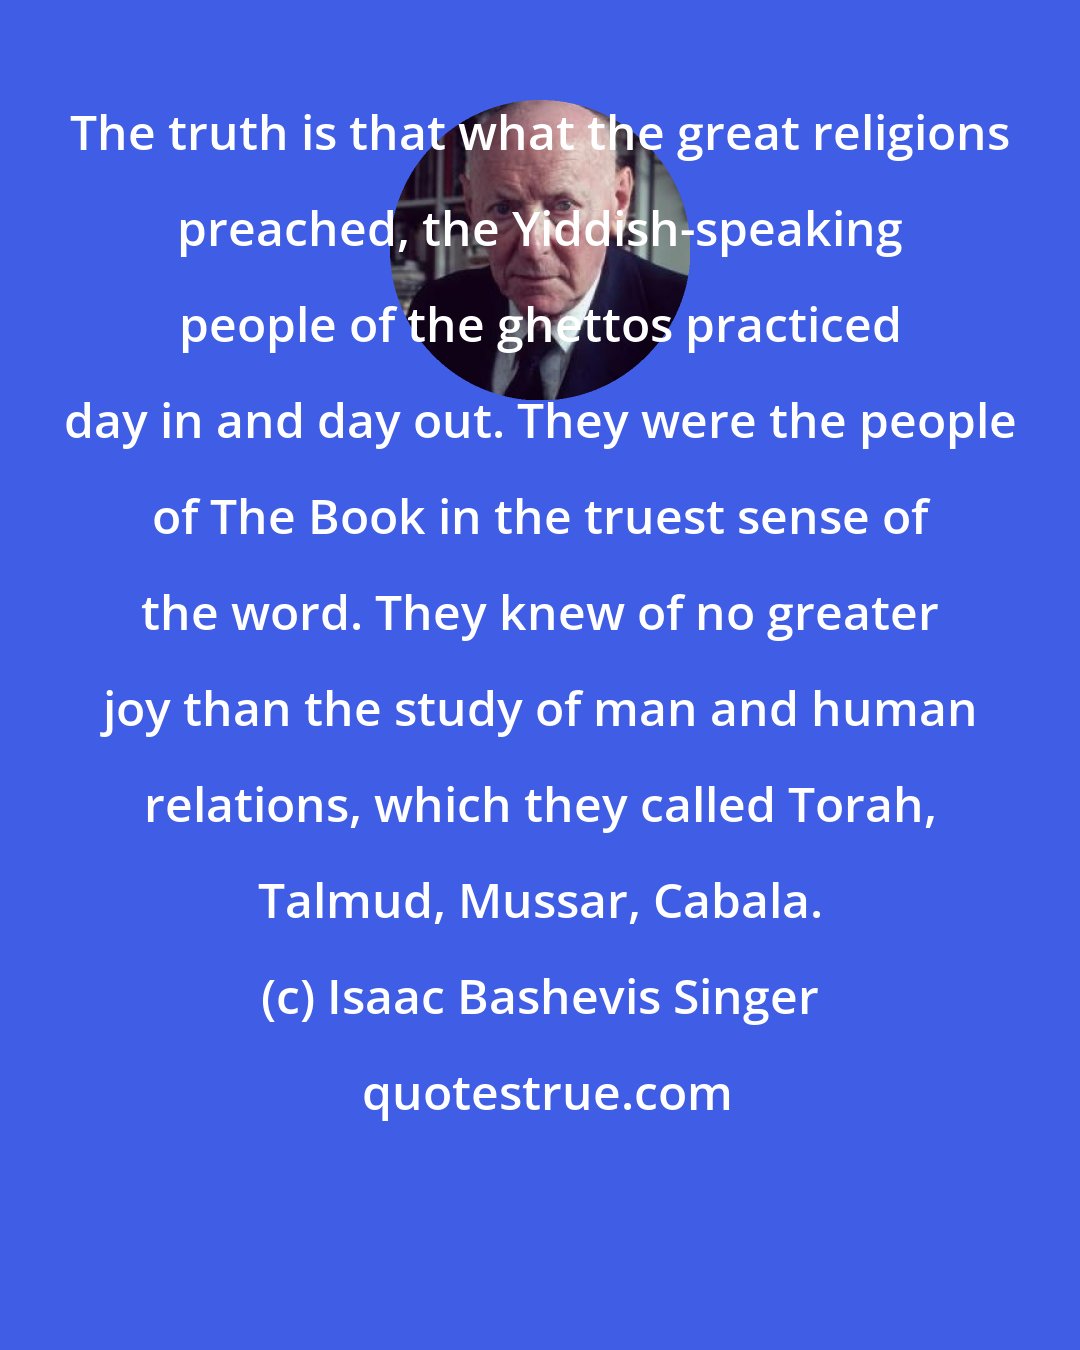 Isaac Bashevis Singer: The truth is that what the great religions preached, the Yiddish-speaking people of the ghettos practiced day in and day out. They were the people of The Book in the truest sense of the word. They knew of no greater joy than the study of man and human relations, which they called Torah, Talmud, Mussar, Cabala.